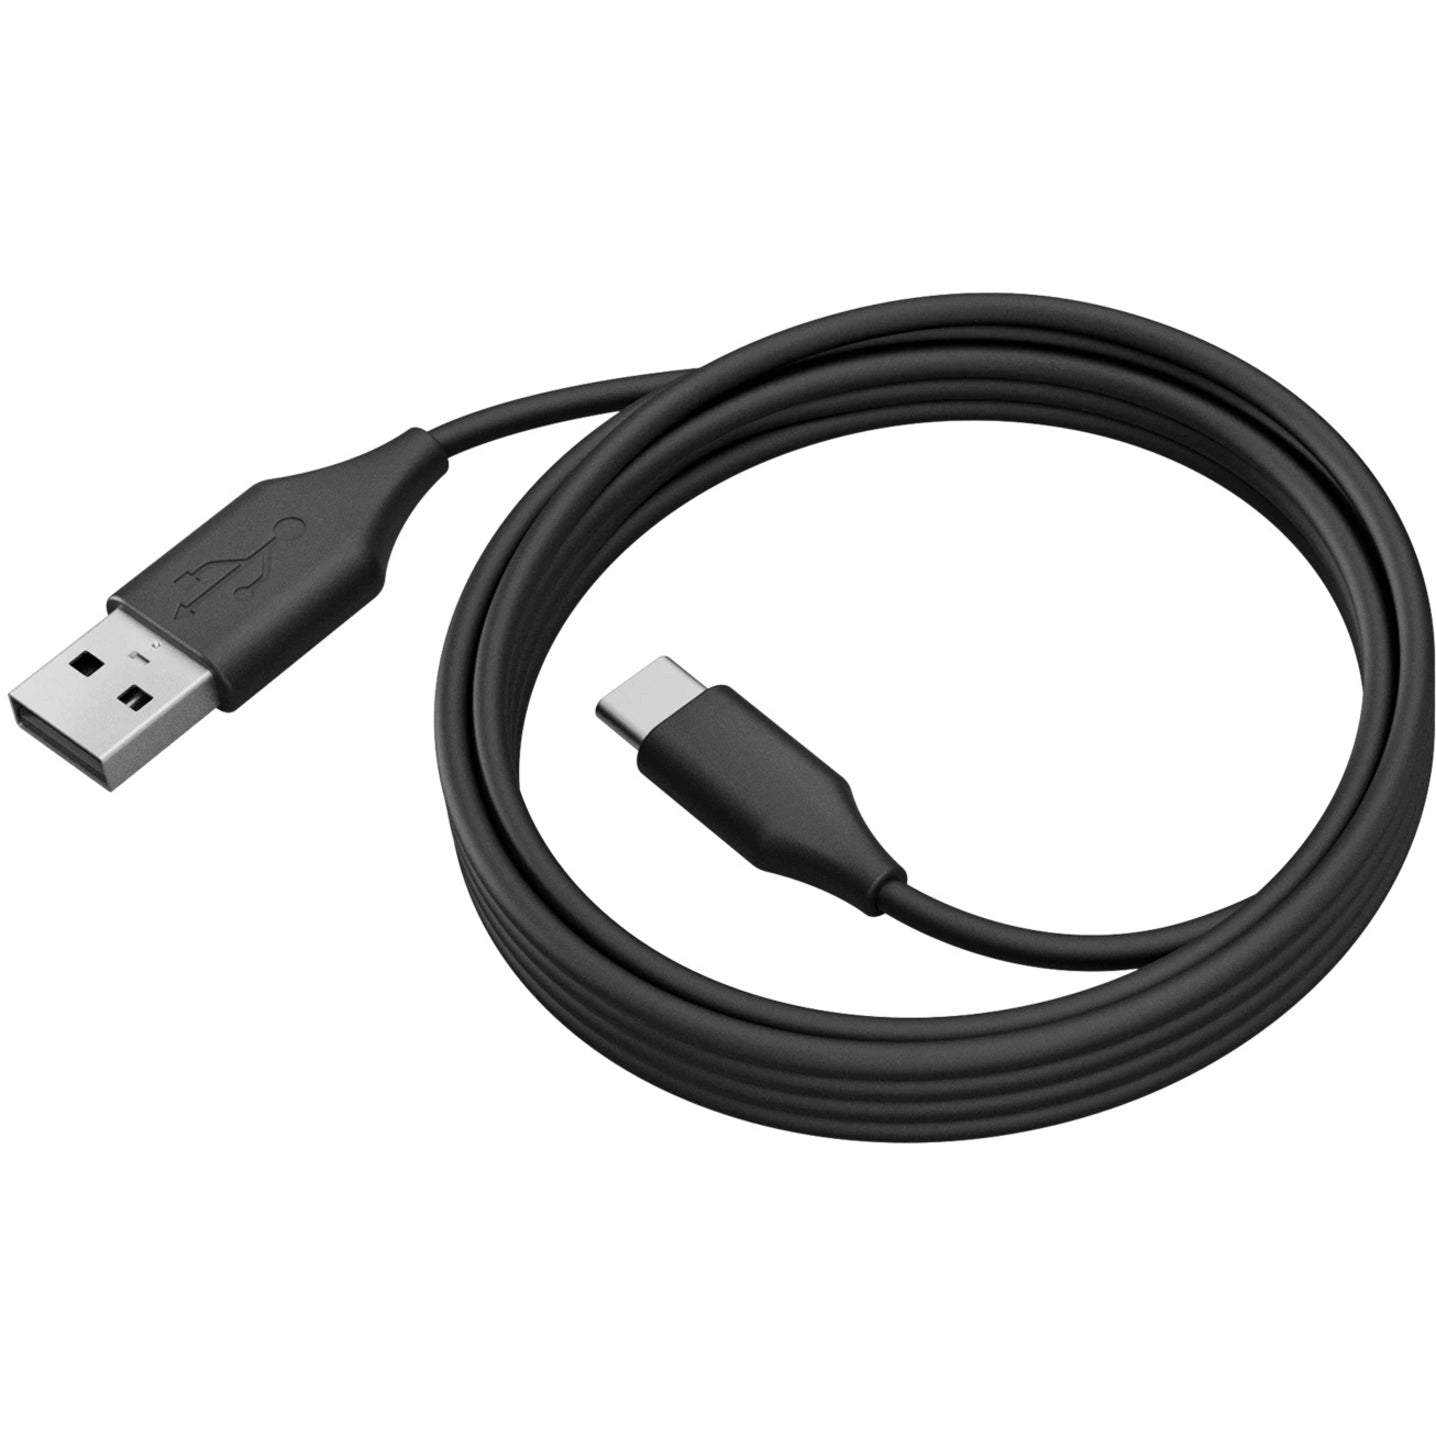 Jabra 14202-10 USB/USB-C Data Transfer Cable, 6.56 ft, for Video Conferencing System